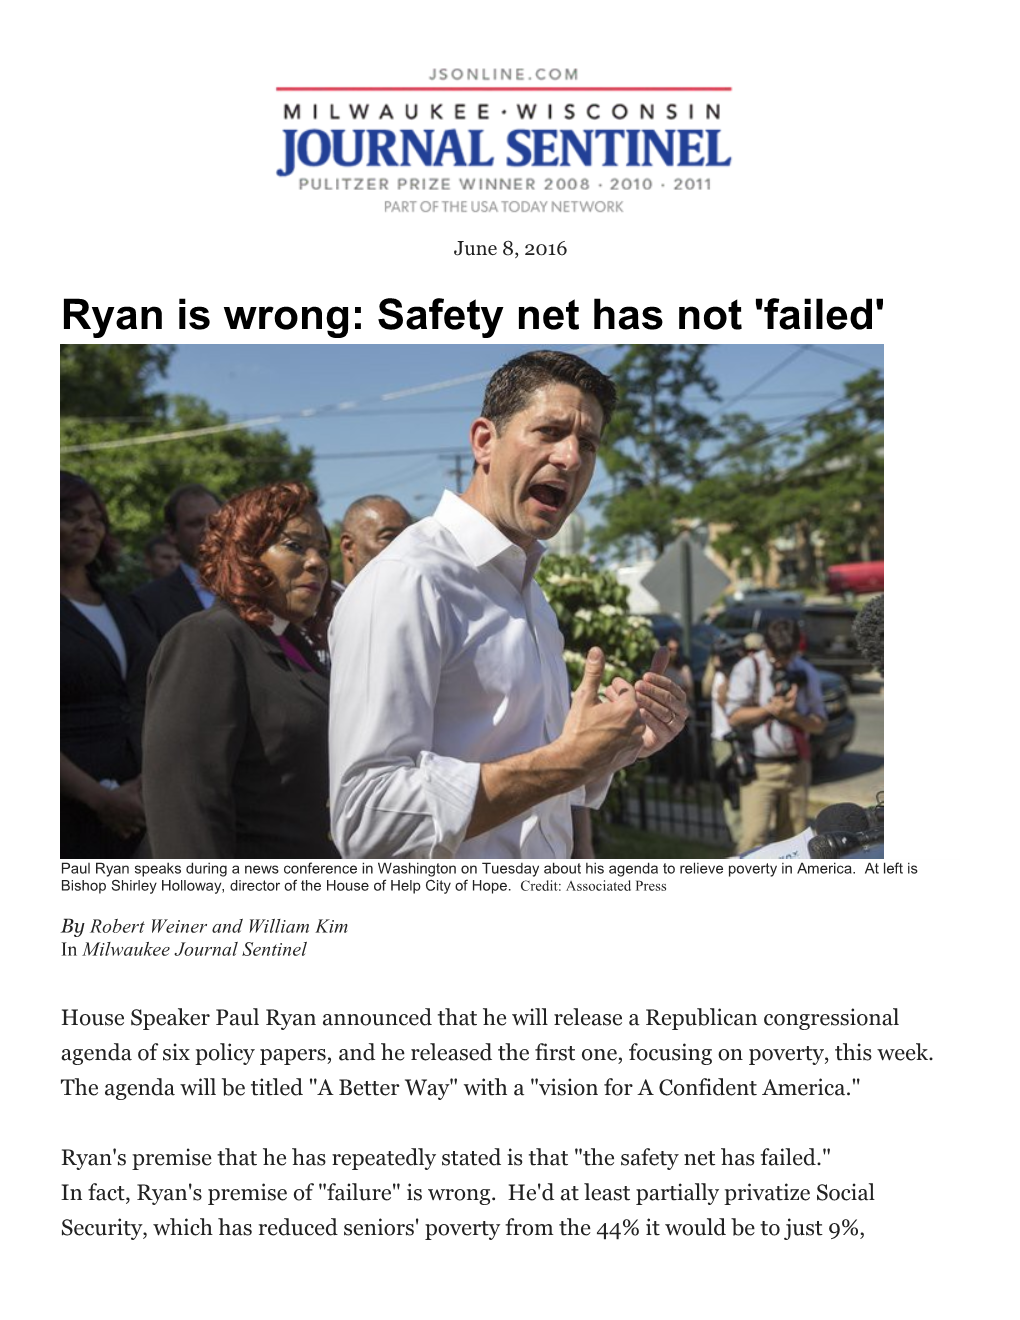 Ryan Is Wrong: Safety Net Has Not 'Failed'